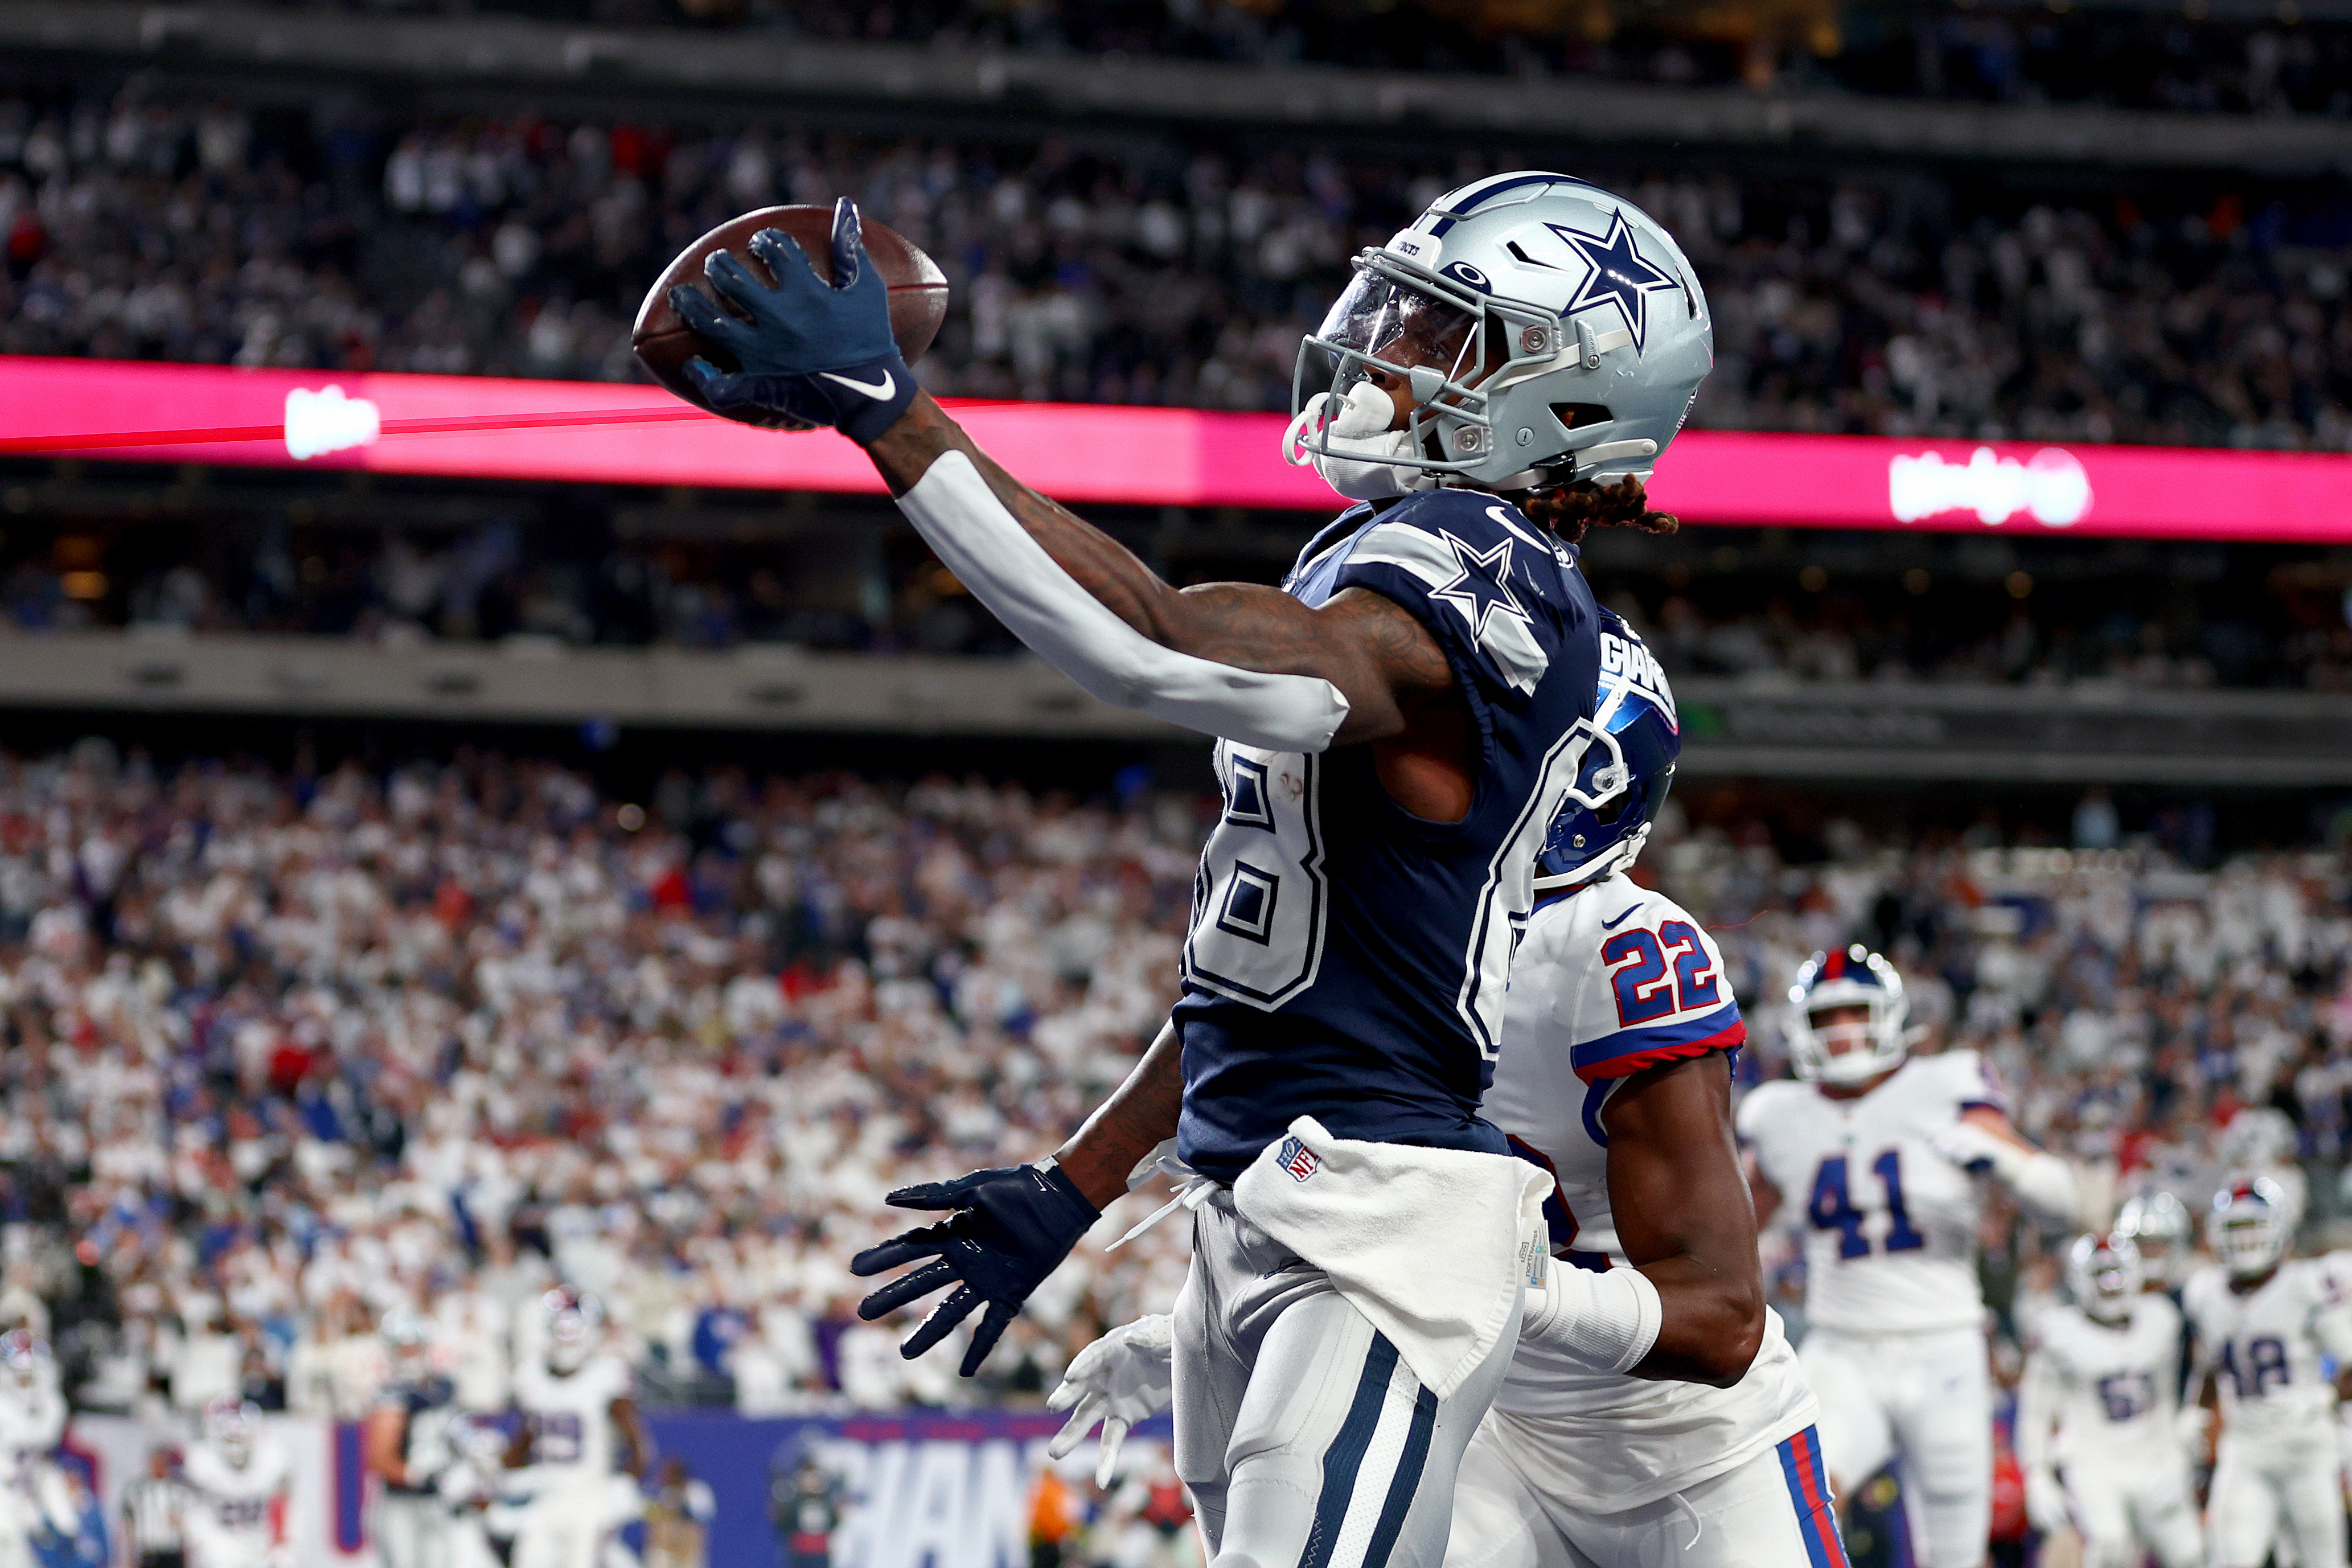 Lamb's 1-handed TD catch gives Dallas 23-16 win over Giants – KTSM 9 News